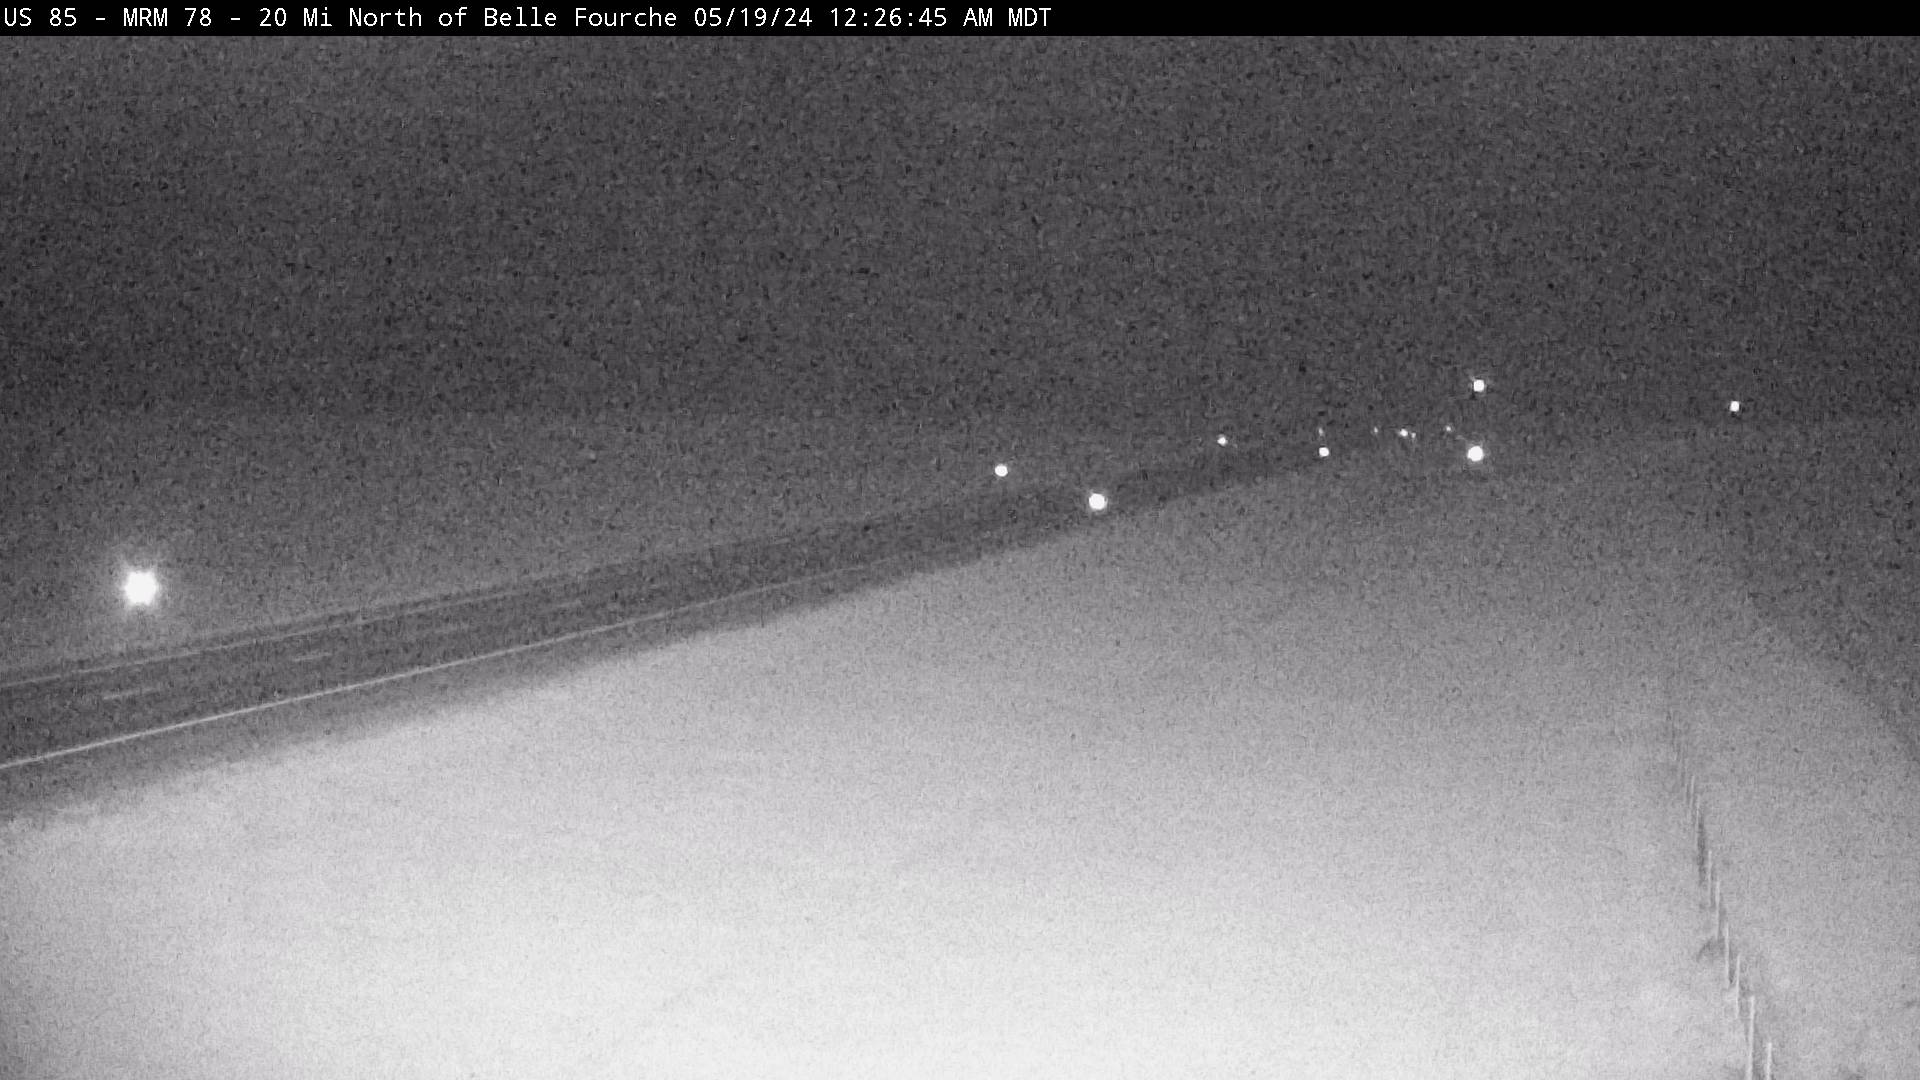 20 miles north of Belle Fourche along US-85 @ MP 78 - Northeast Traffic Camera